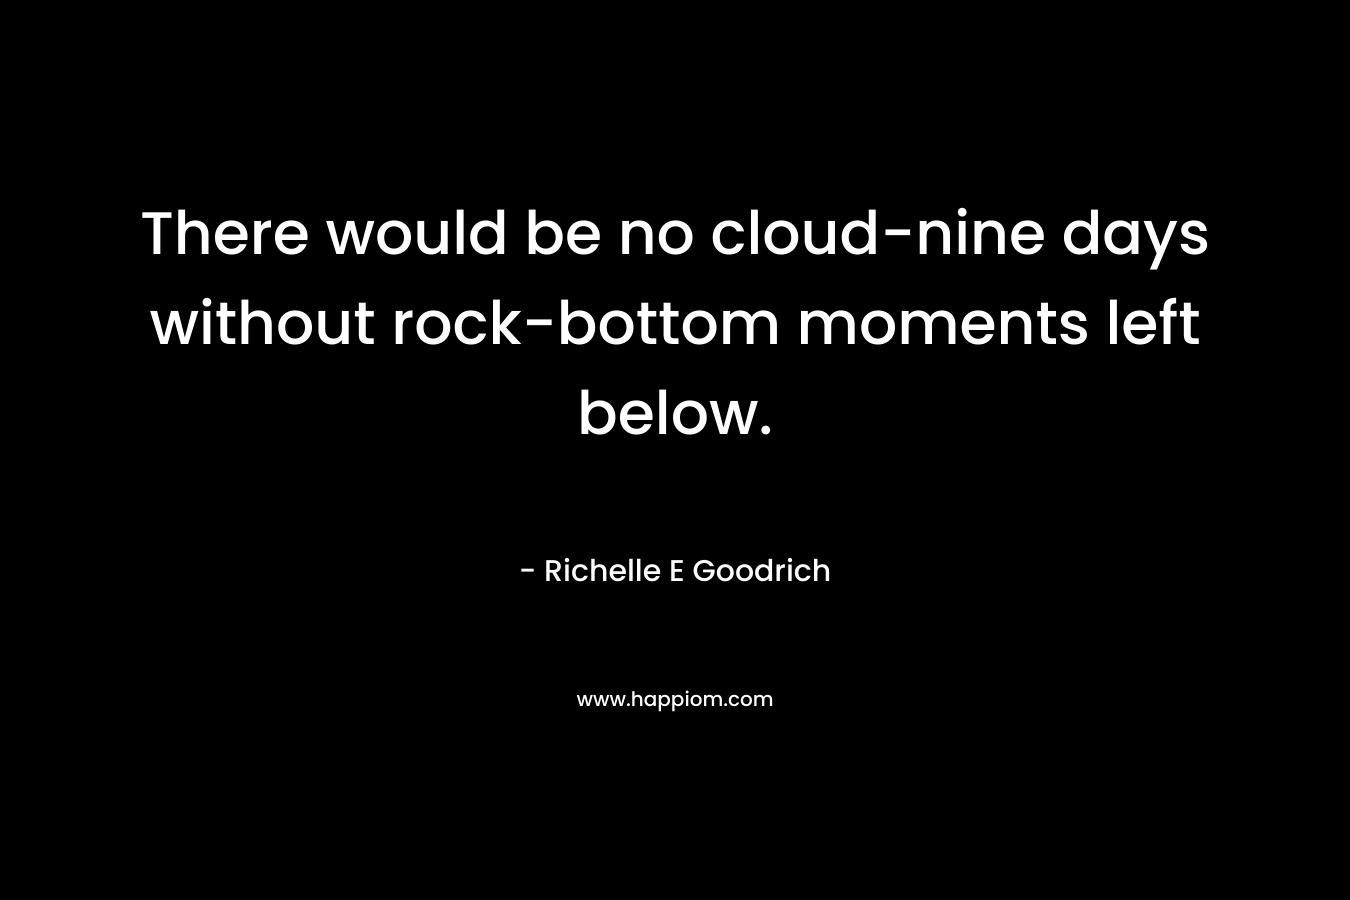 There would be no cloud-nine days without rock-bottom moments left below. – Richelle E Goodrich